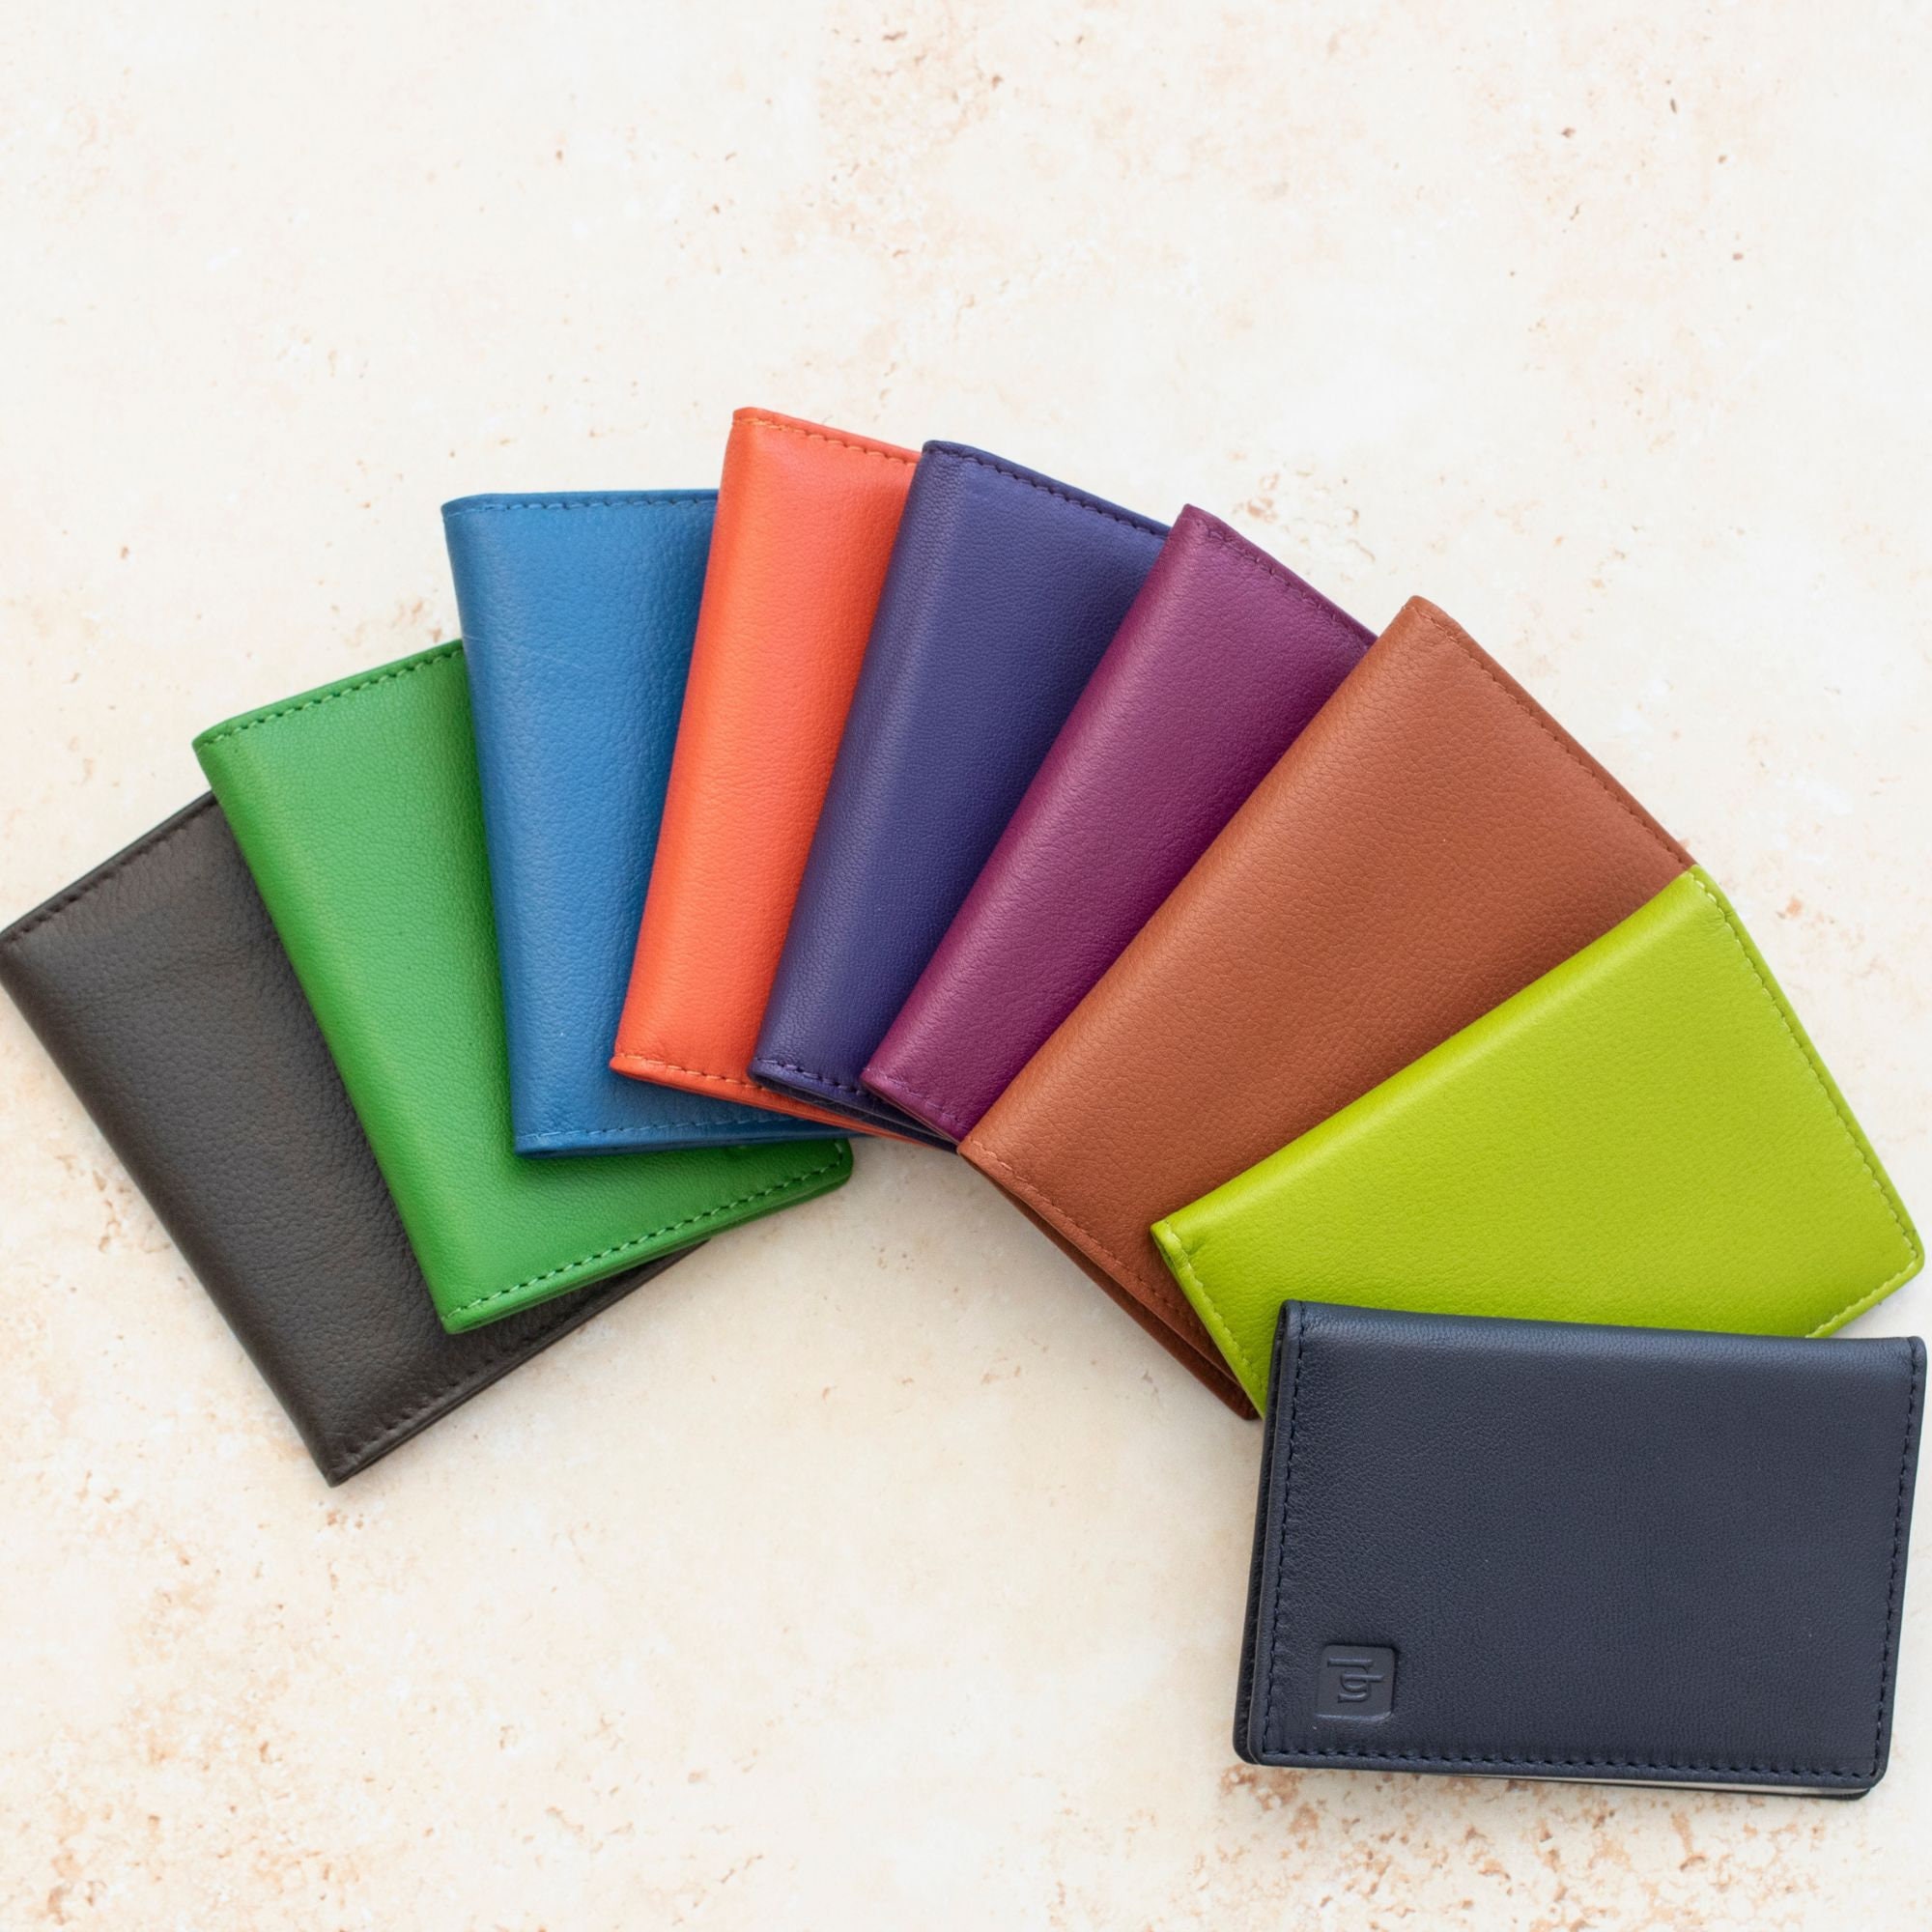 Hydestyle Genuine Leather Credit Card Holder Wallet For 34 Cards with Plastic Sleeves #GW701